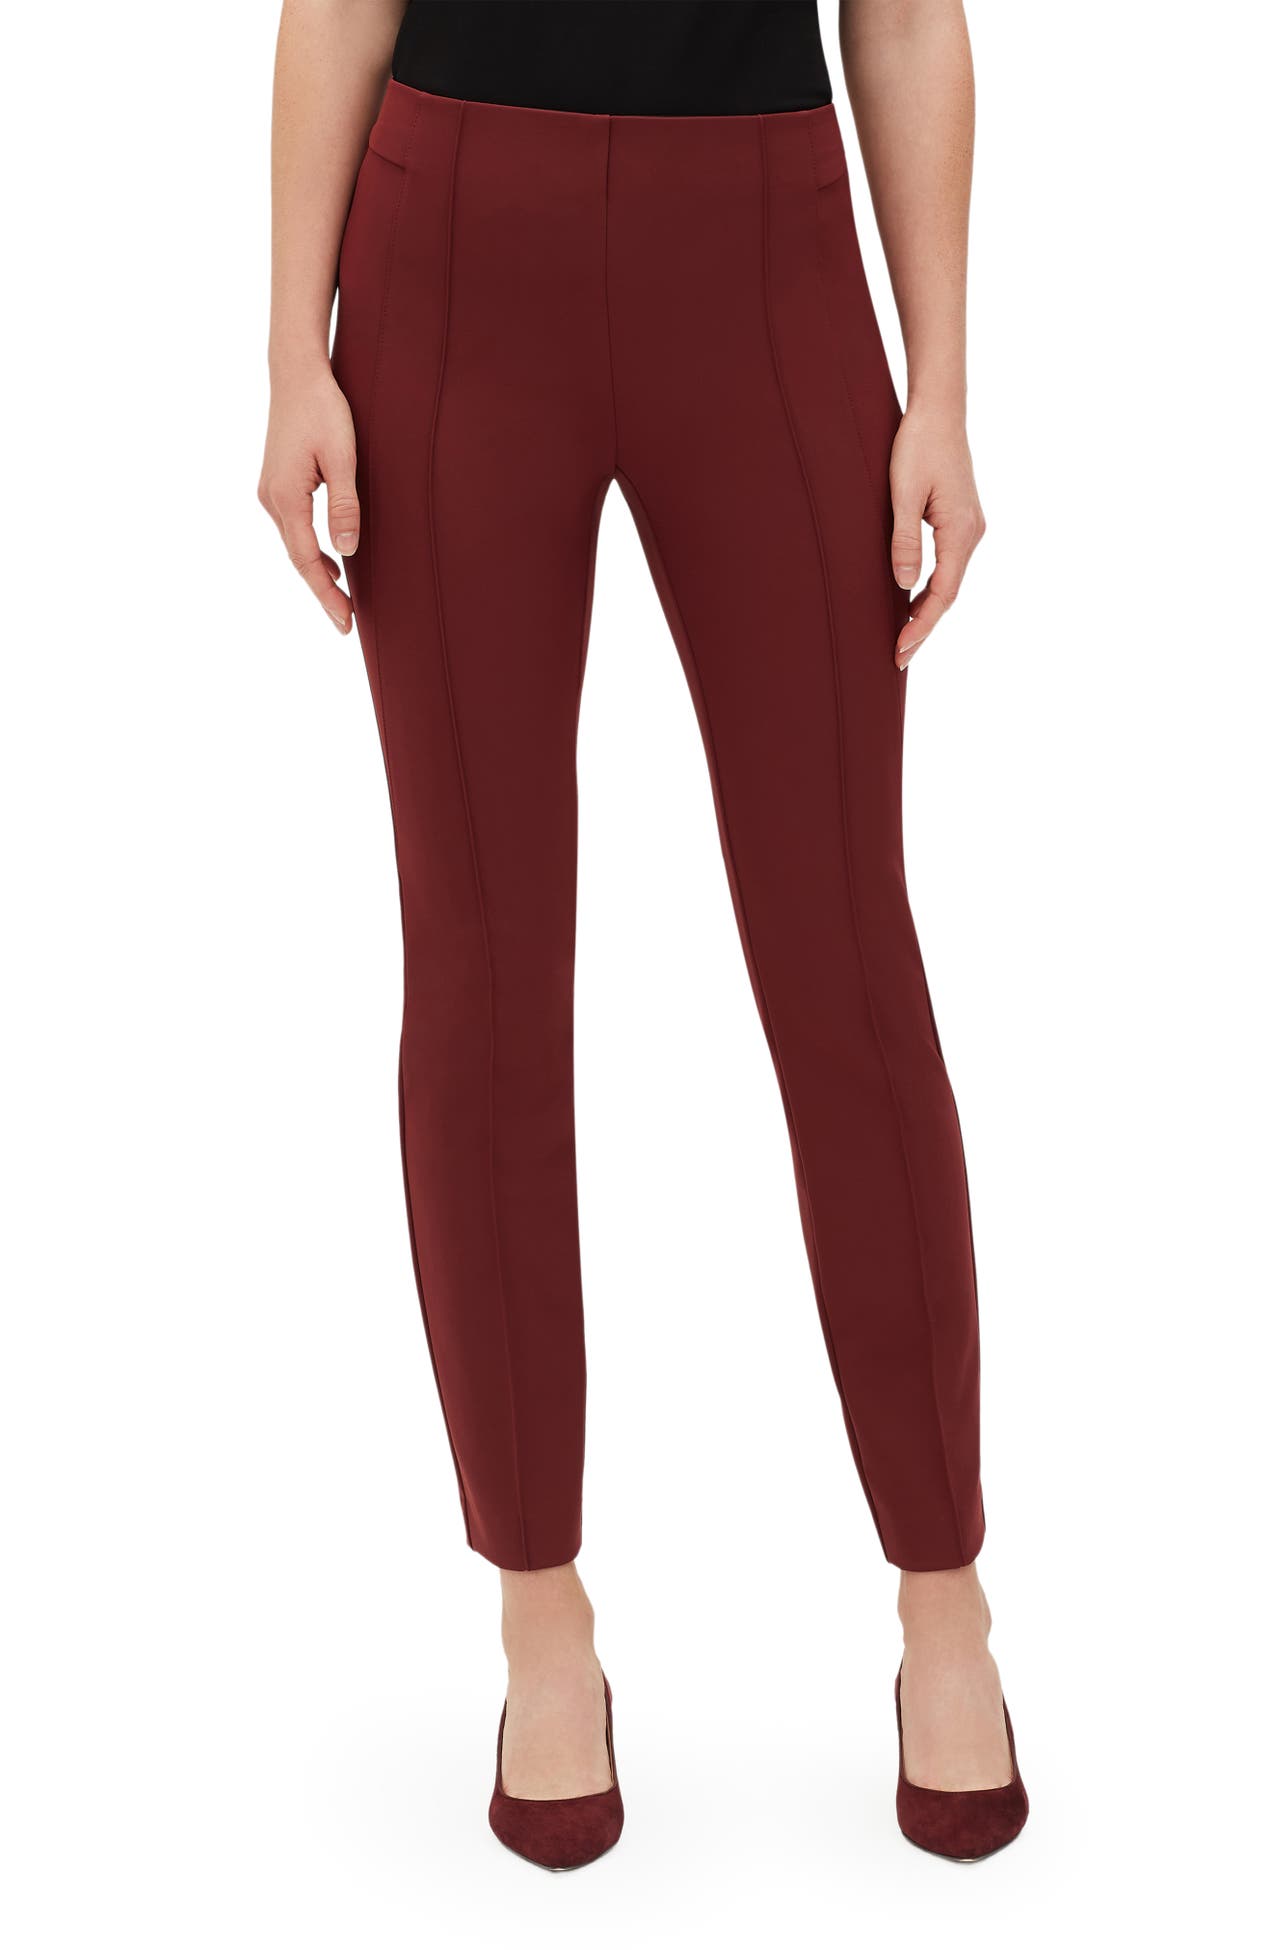 Lafayette 148 New York | Gramercy Acclaimed Stretch Pants | Nordstrom Rack